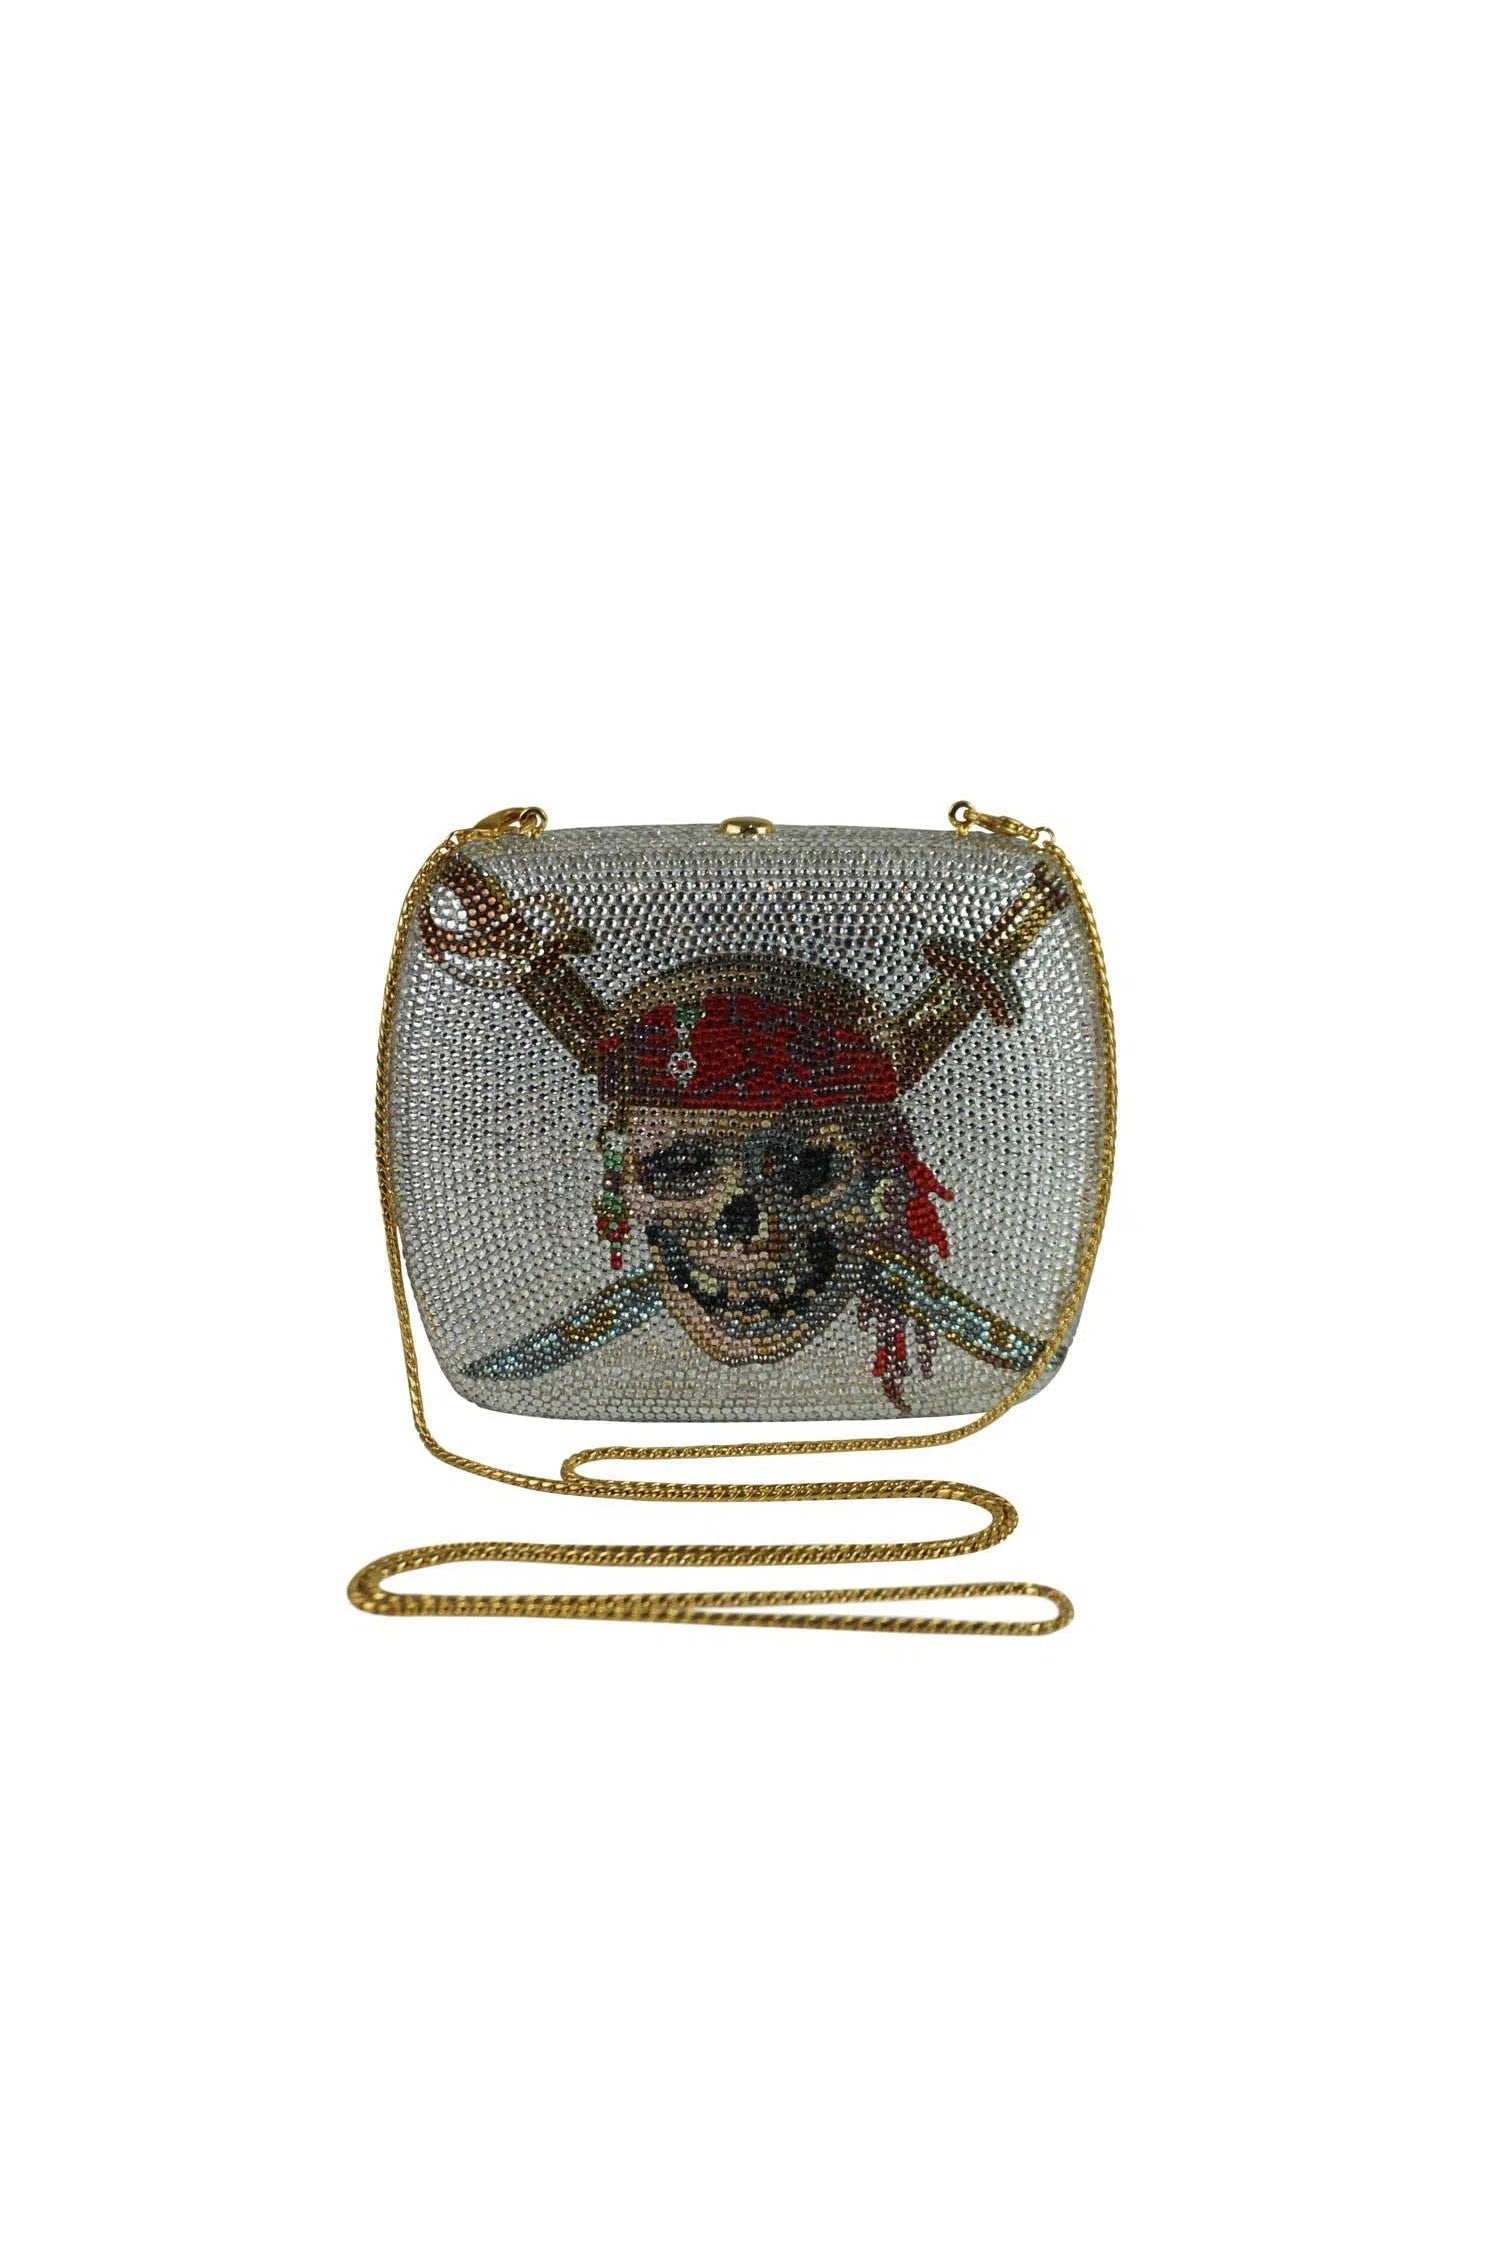 Judith Leiber "Dead Man's Chest" Pirates of the Caribbean Crystal Minaudiere - Foxy Couture Carmel